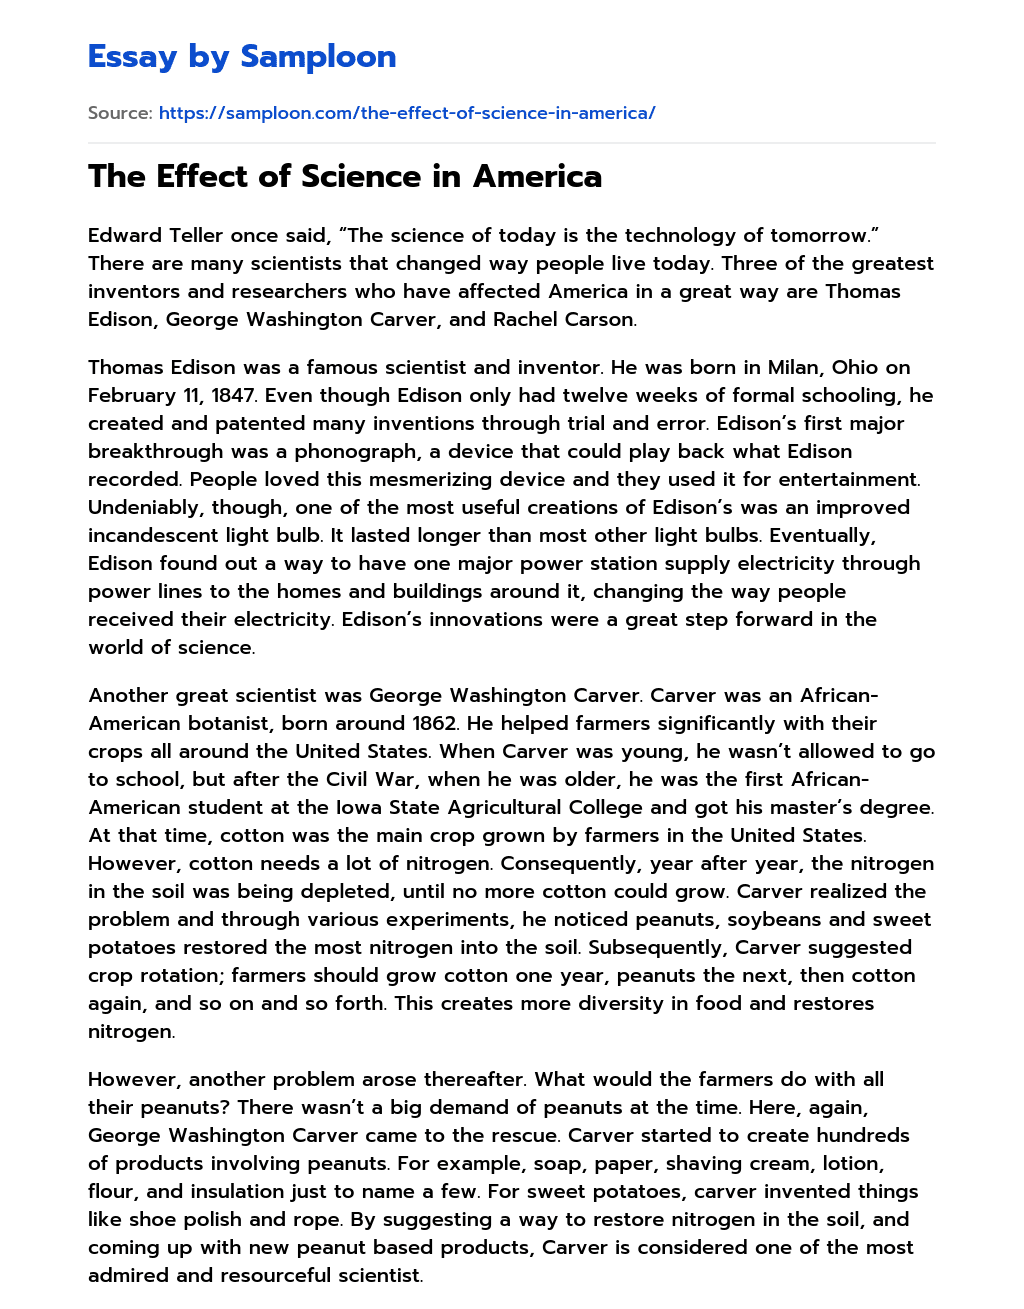 The Effect of Science in America essay